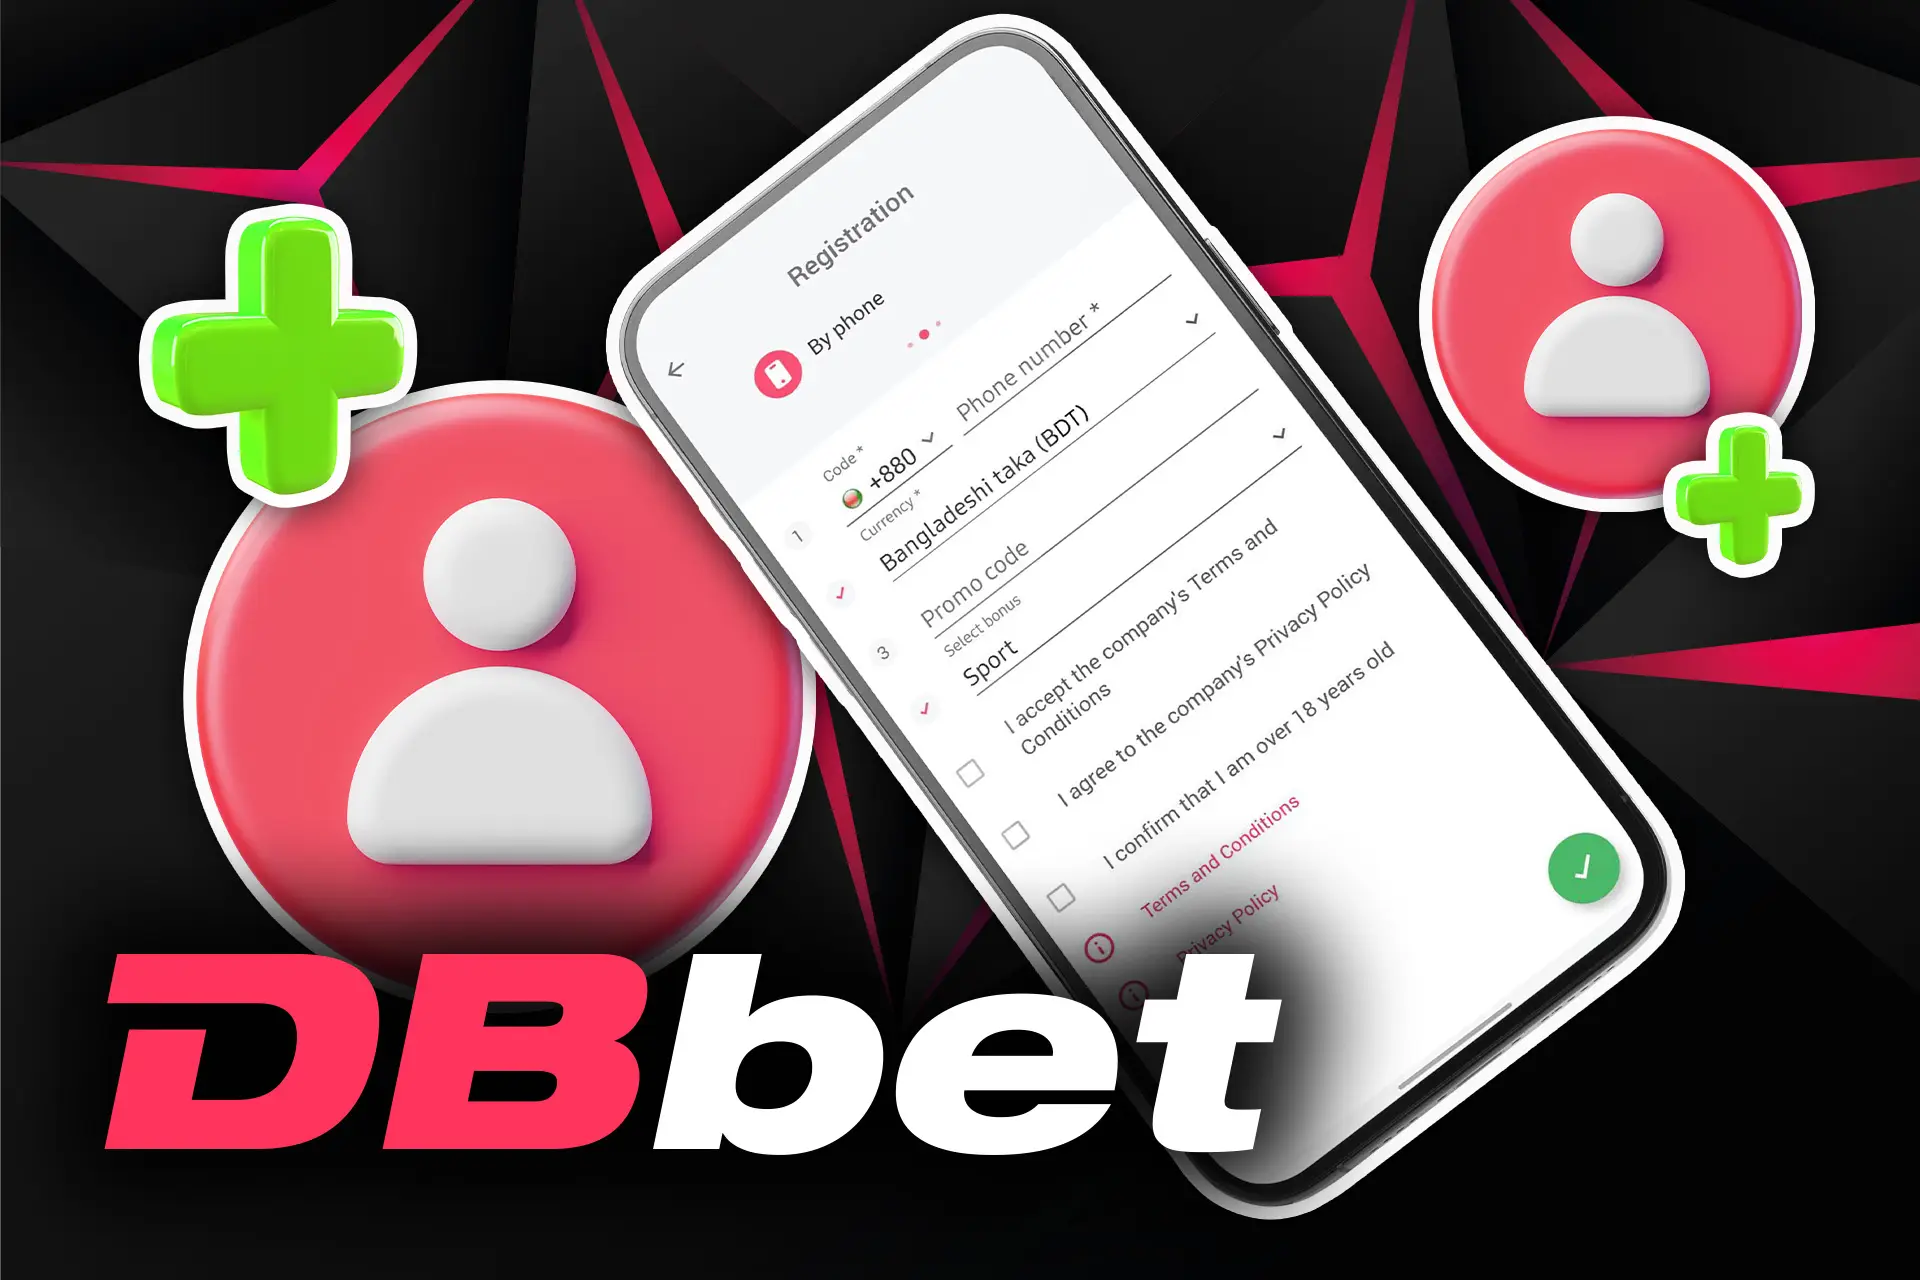 Go through a simple registration in the DBbet app.